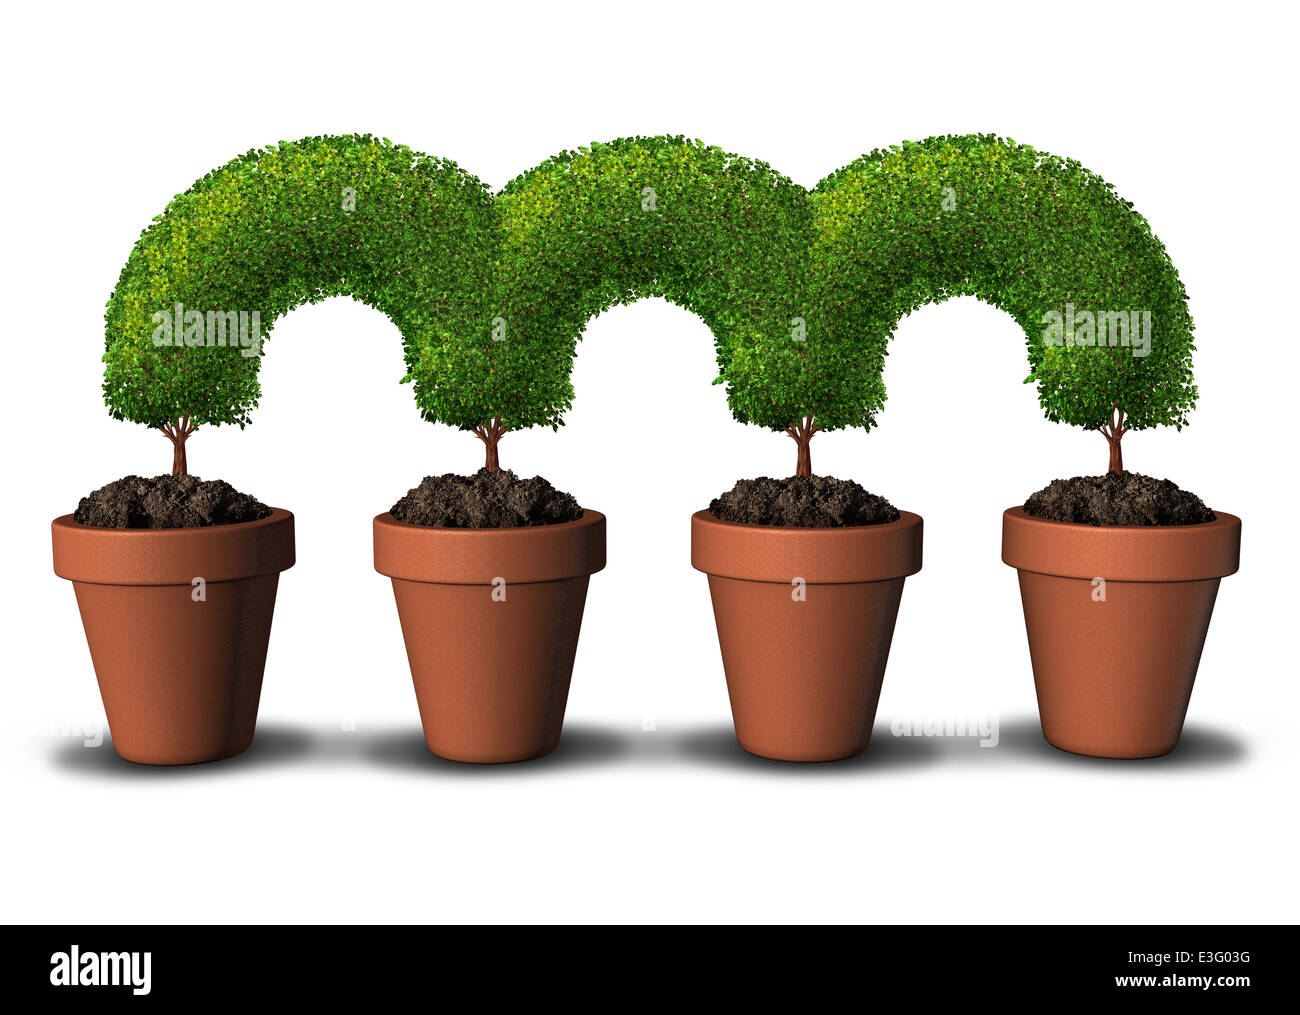 Growth network business concept as a group of planting pots with trees connected together in a linked chain as a metaphor for communication and partnership success or bridging the gap by growing in unity. Stock Photo